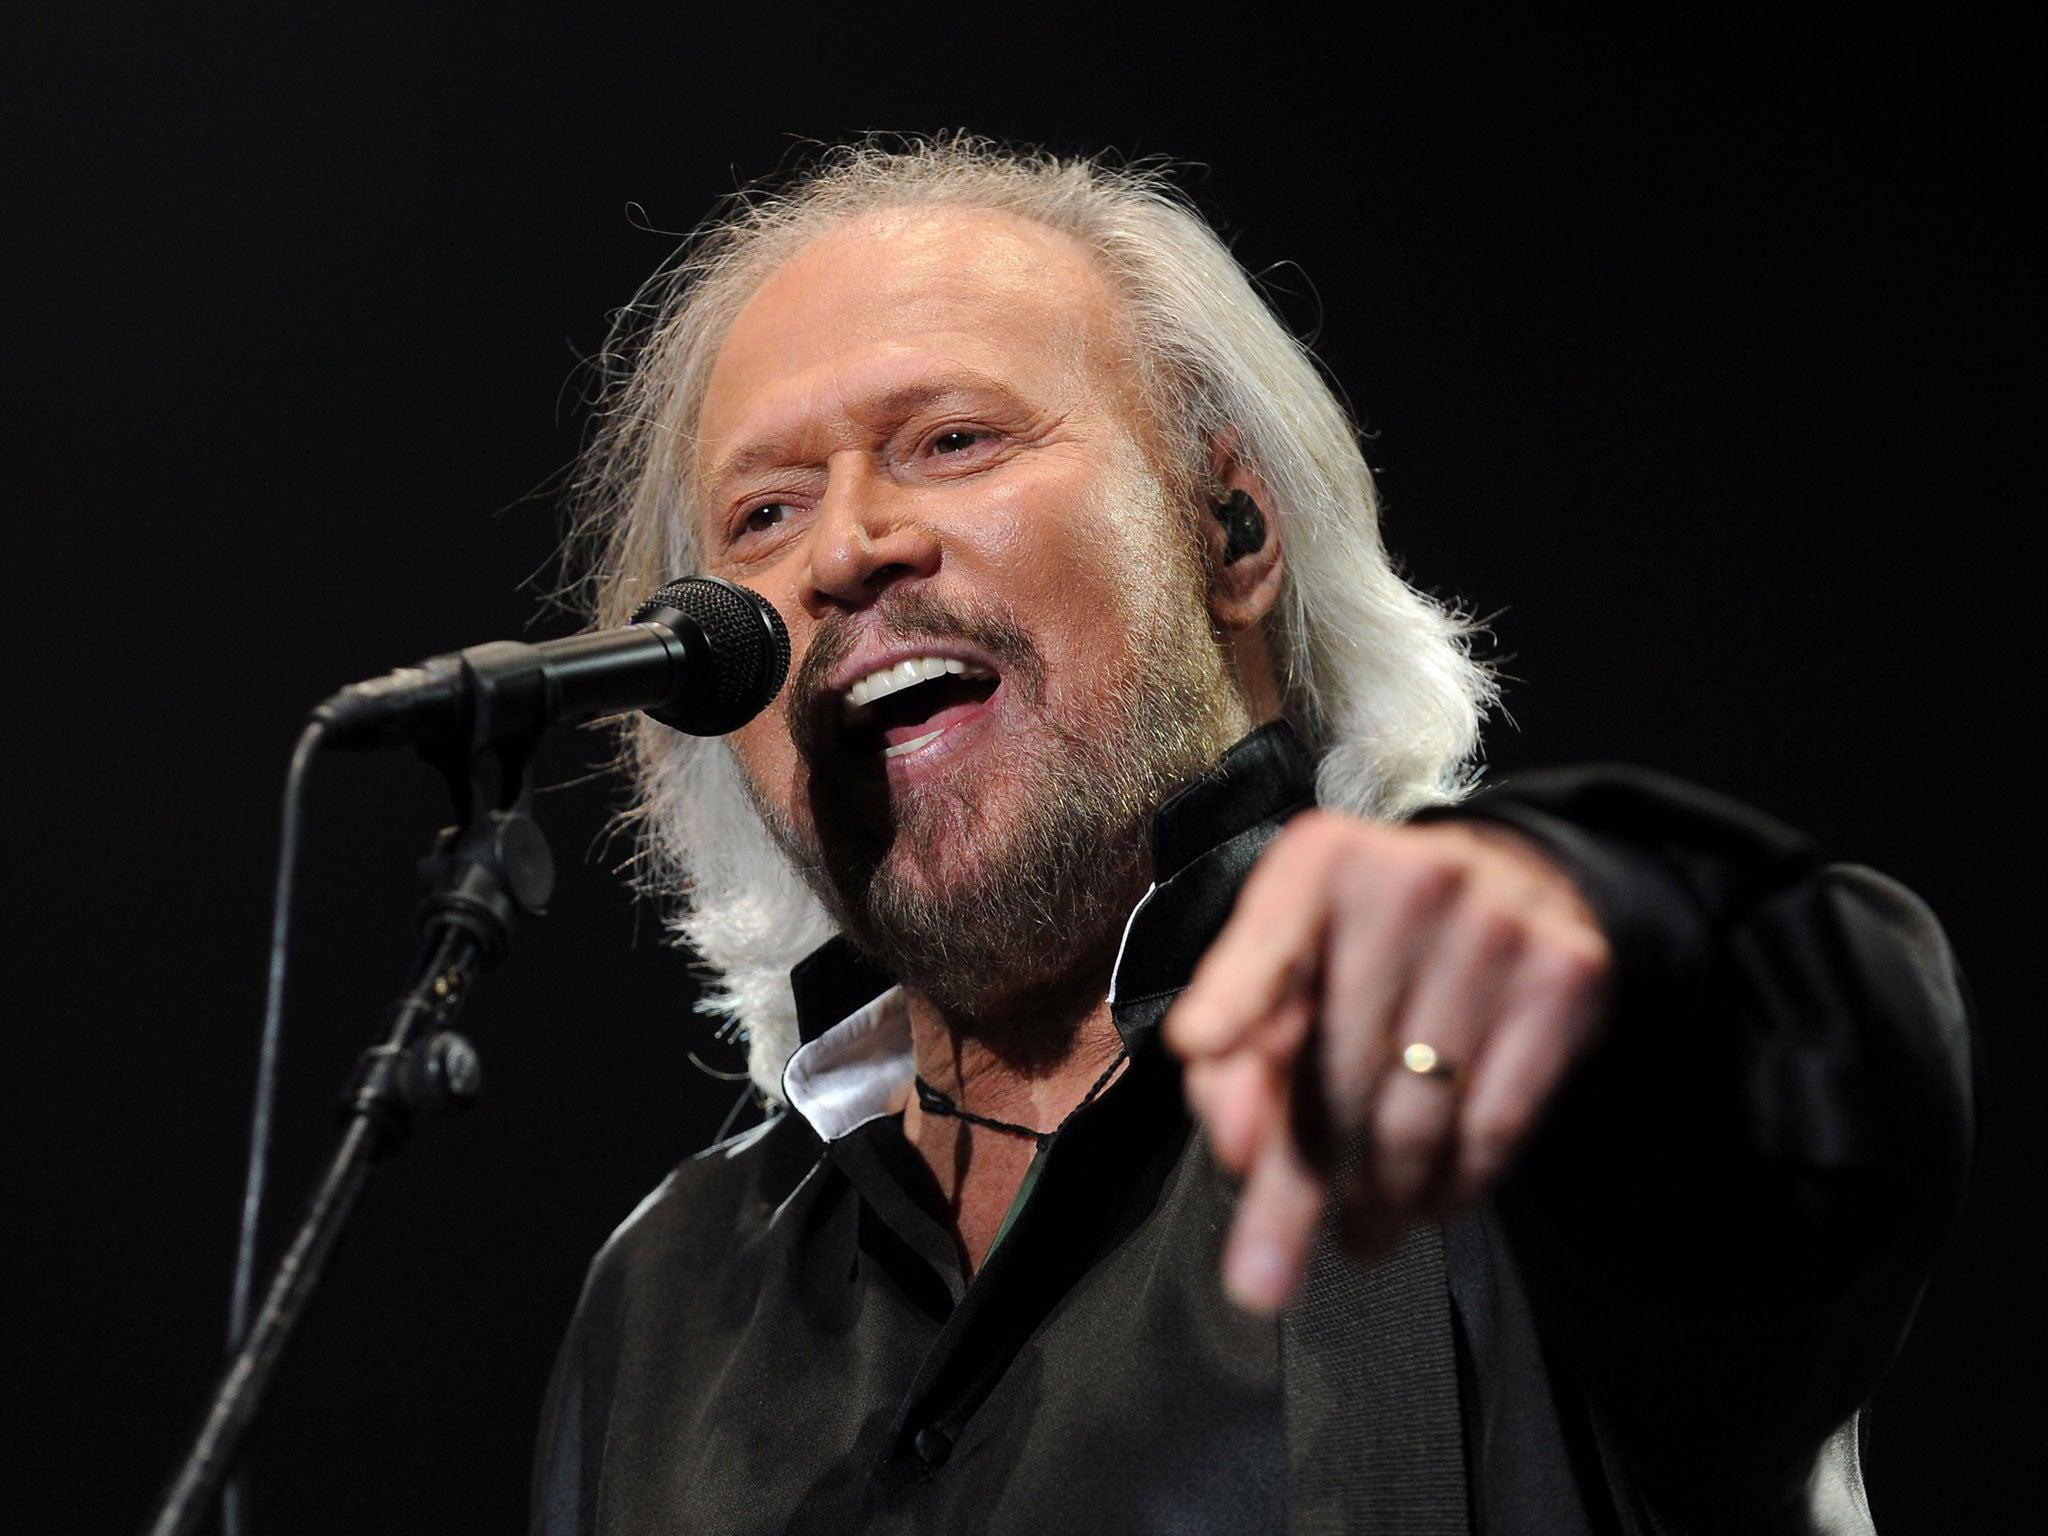 Gig review: Barry Gibb.